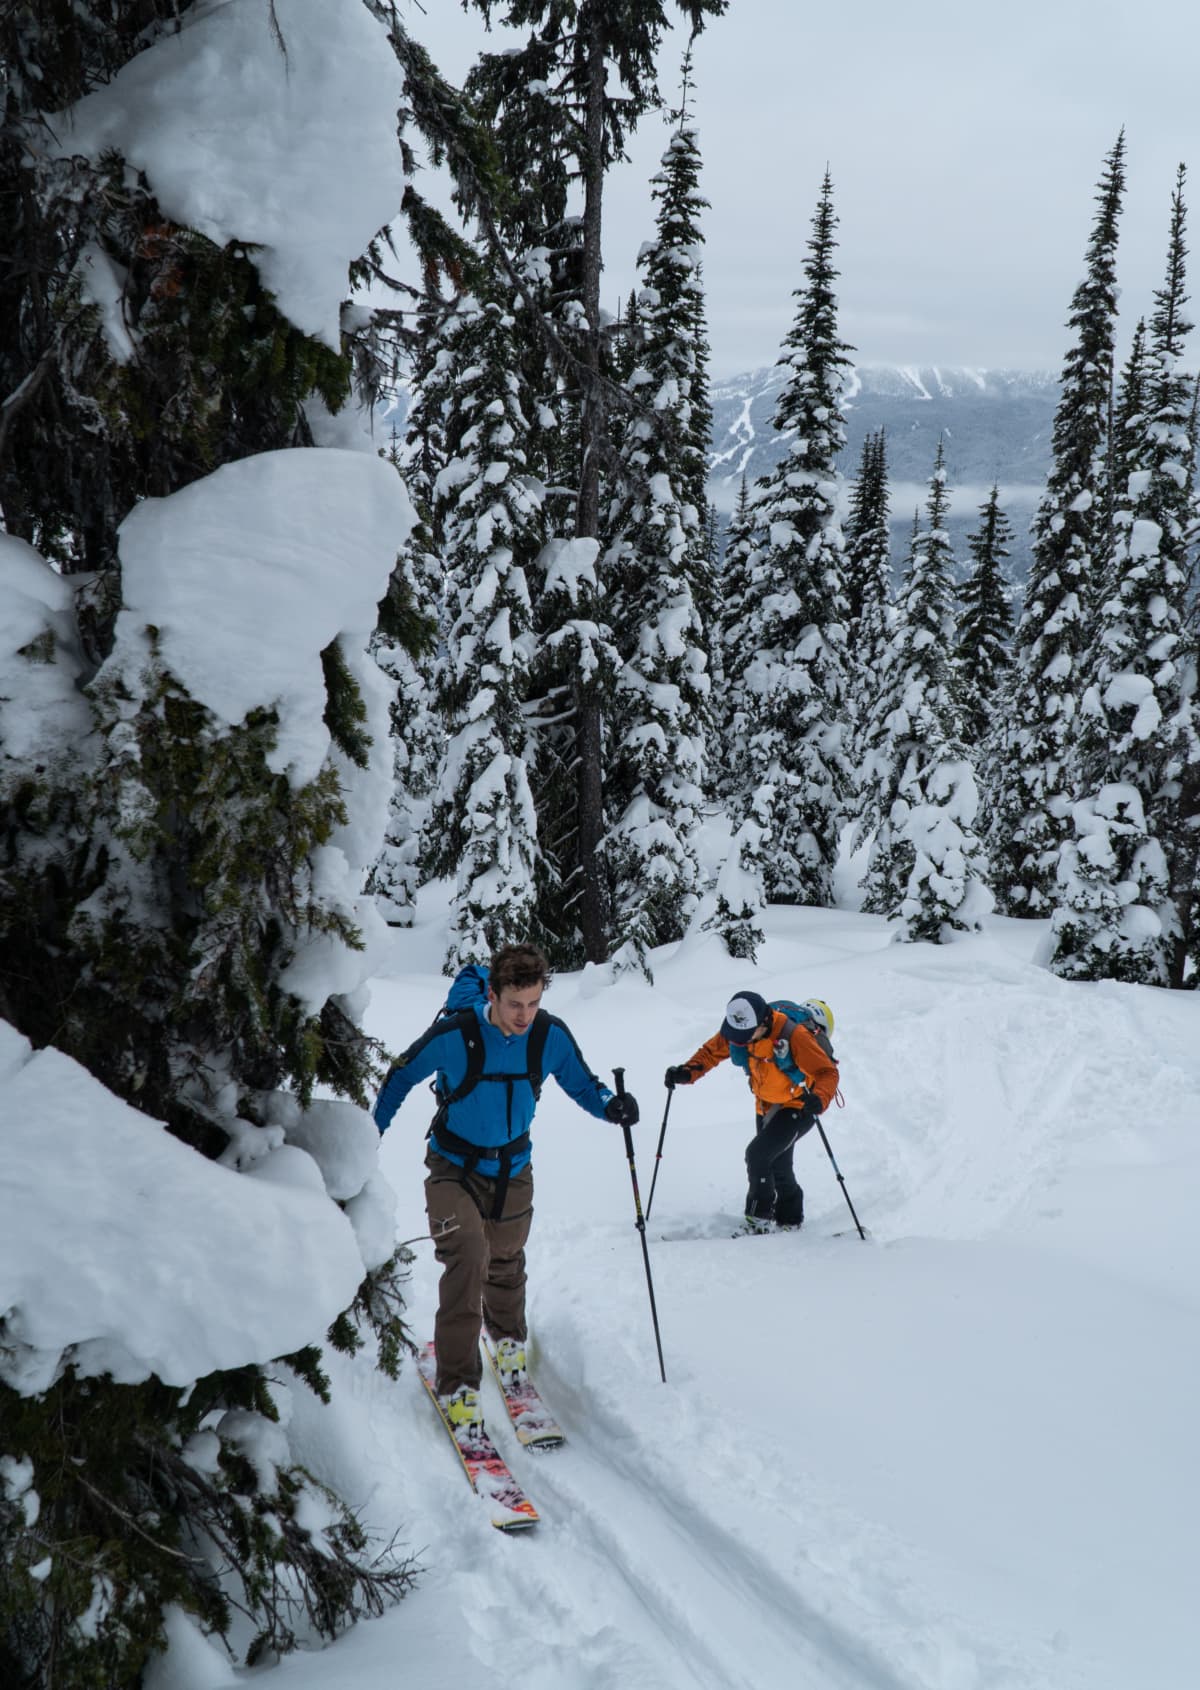 ski tourers climbing up old growth forest in british columbia